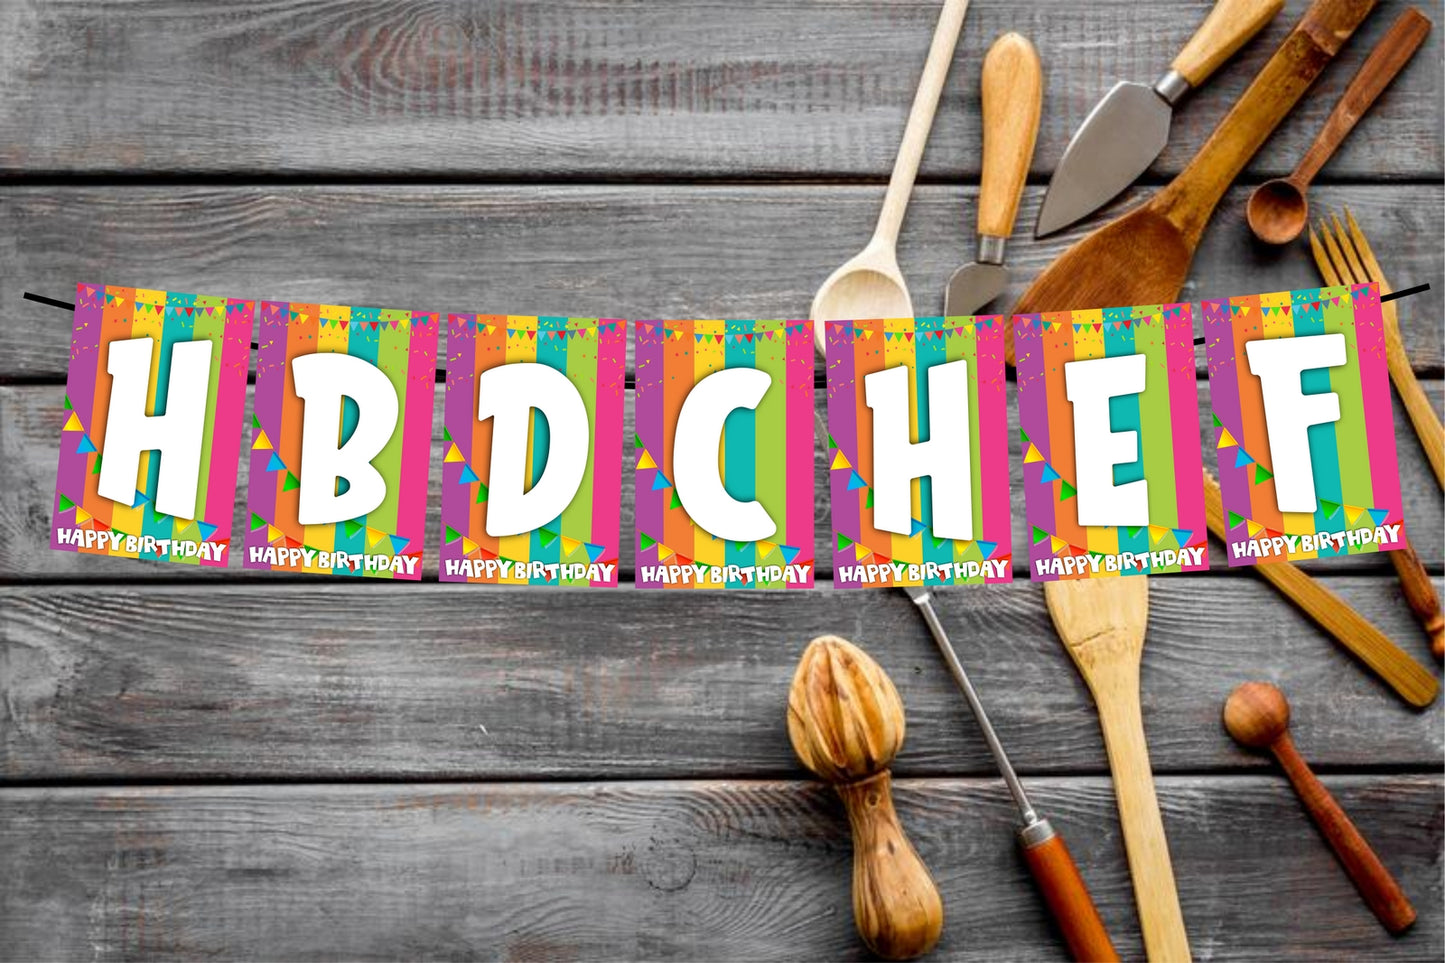 Happy Birthday Chef Birthday Decoration Hanging and Banner for Photo Shoot Backdrop and Theme Party